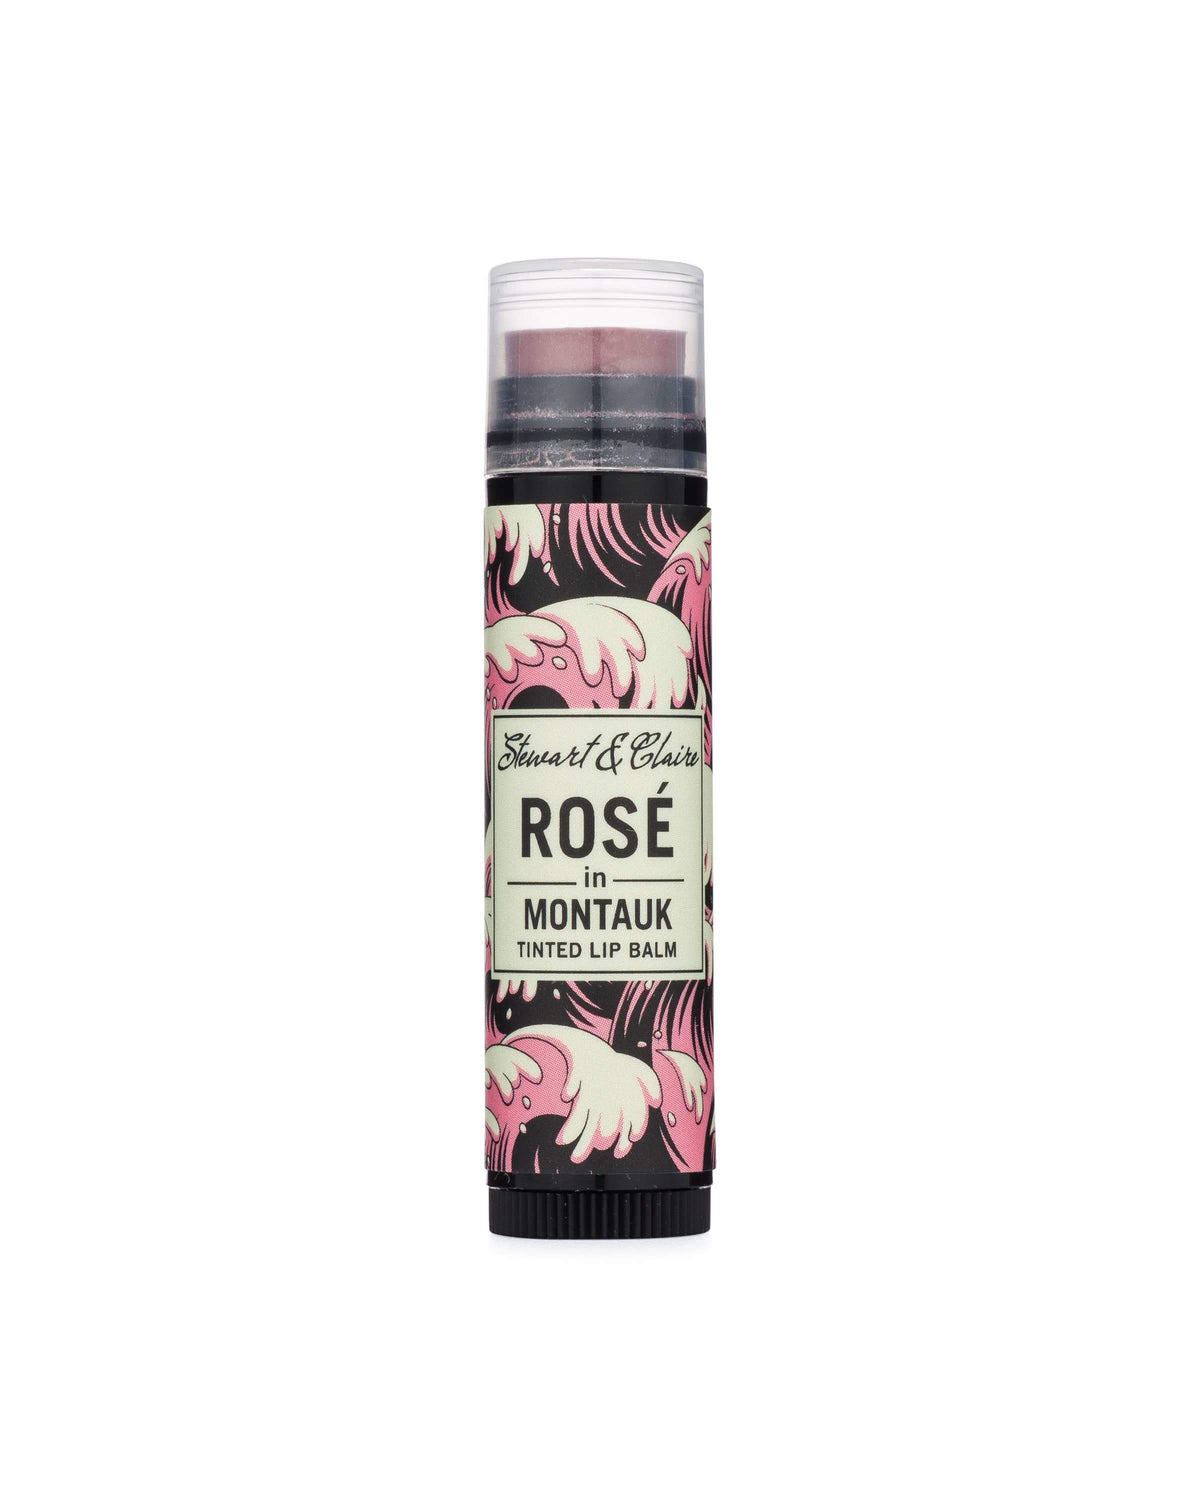 A cylindrical lip balm container with a stylish design featuring black zebra stripes and pink accents, labeled "Rosé In Montauk tinted lip balm by Stewart & Claire," enriched with organic virgin coconut.